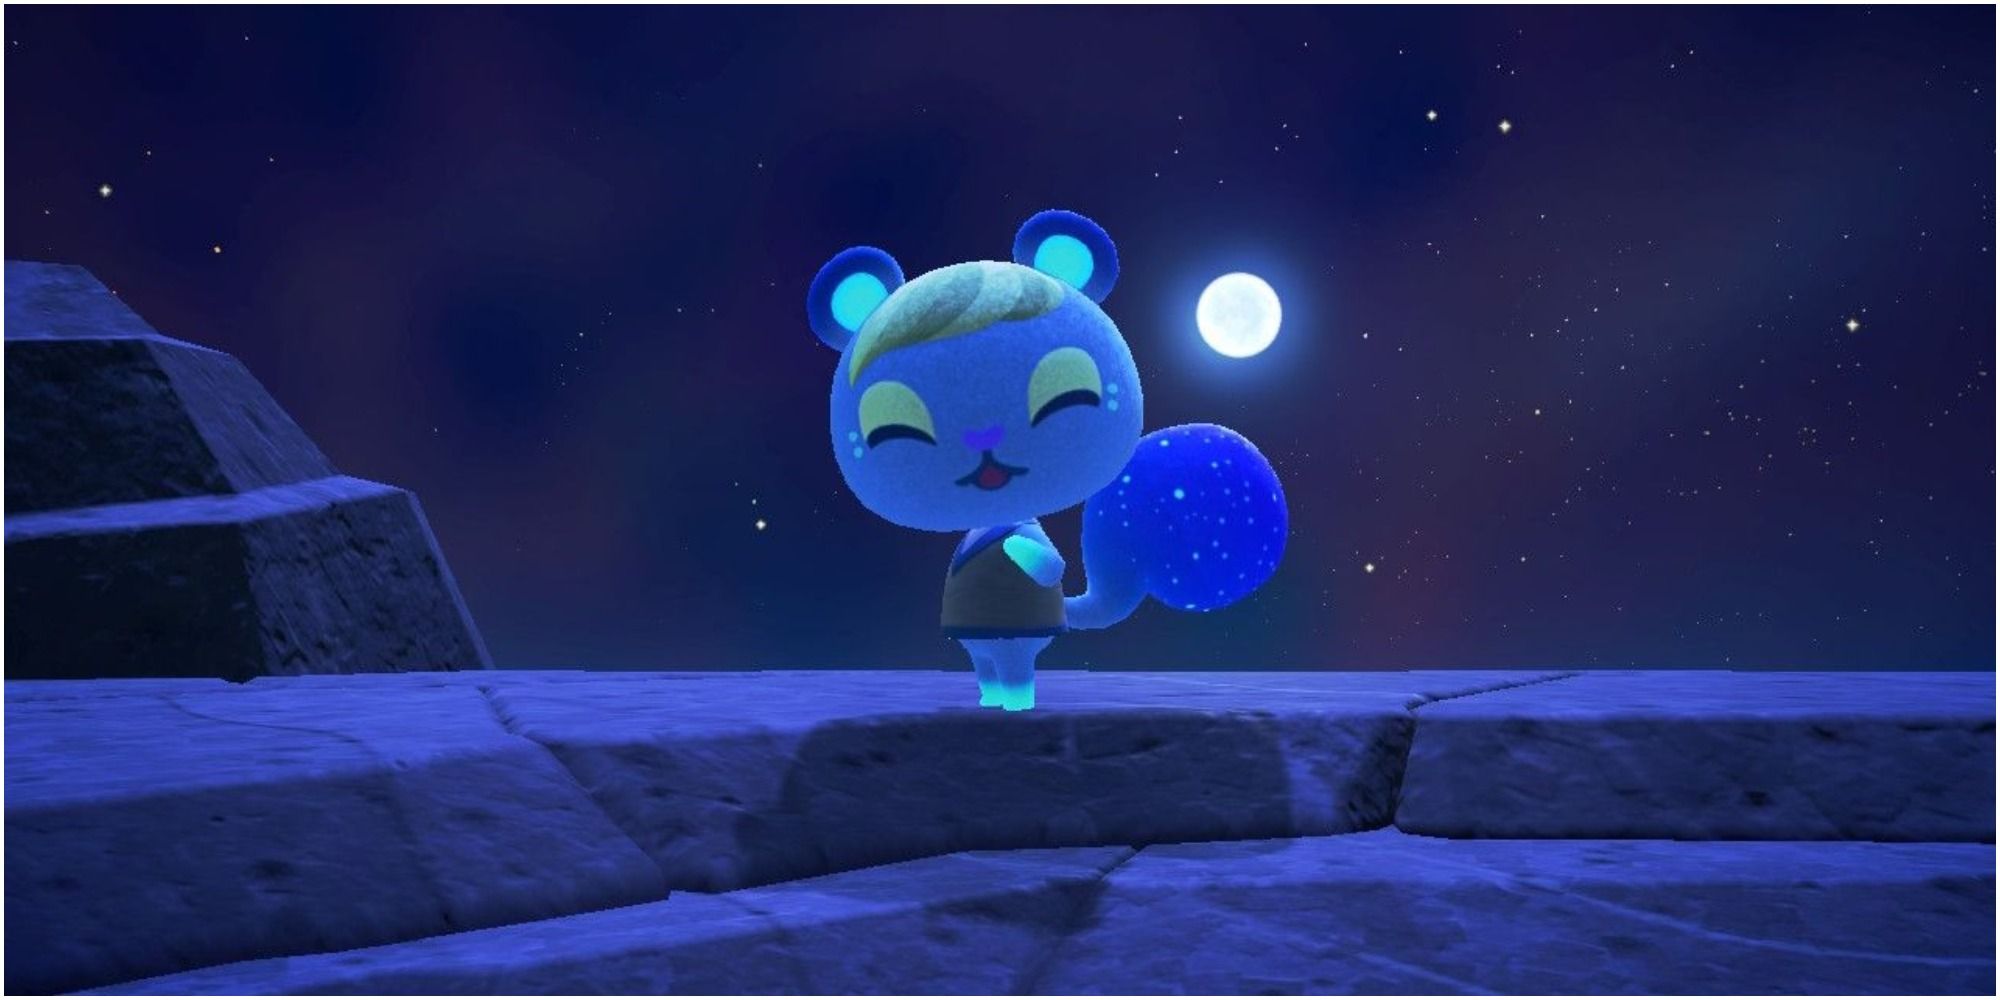 10 Best Animal Crossing New Horizons Villagers Ranked